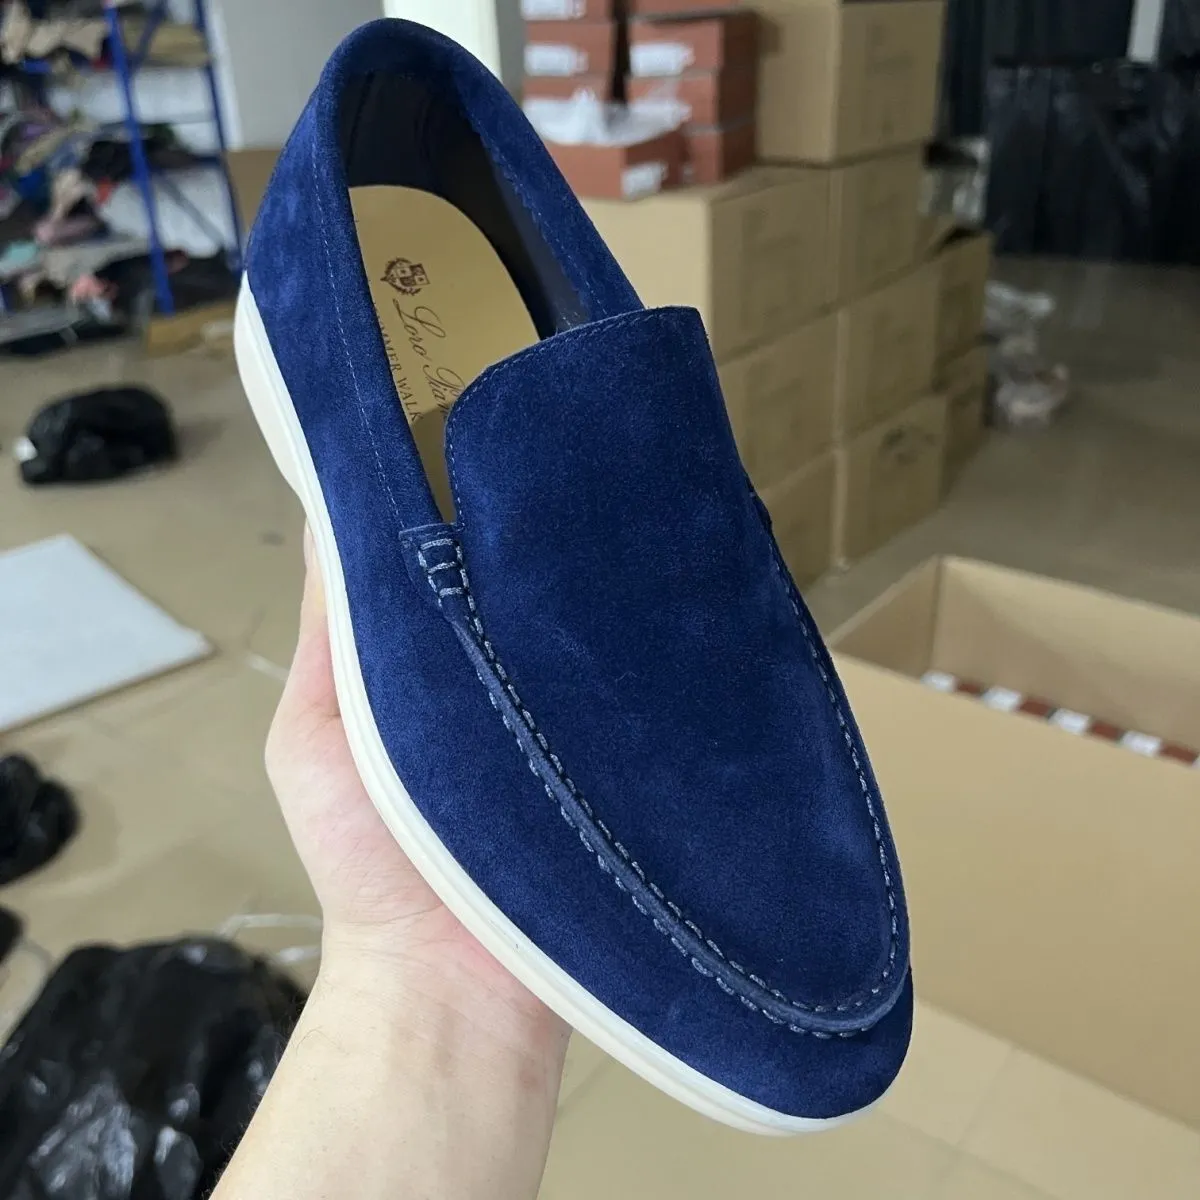 23s Loros Men casual dress shoes LP loafers summer walk flats soft suede leather low top slip on rubber sole handmade sneaker shoe with box 38-46